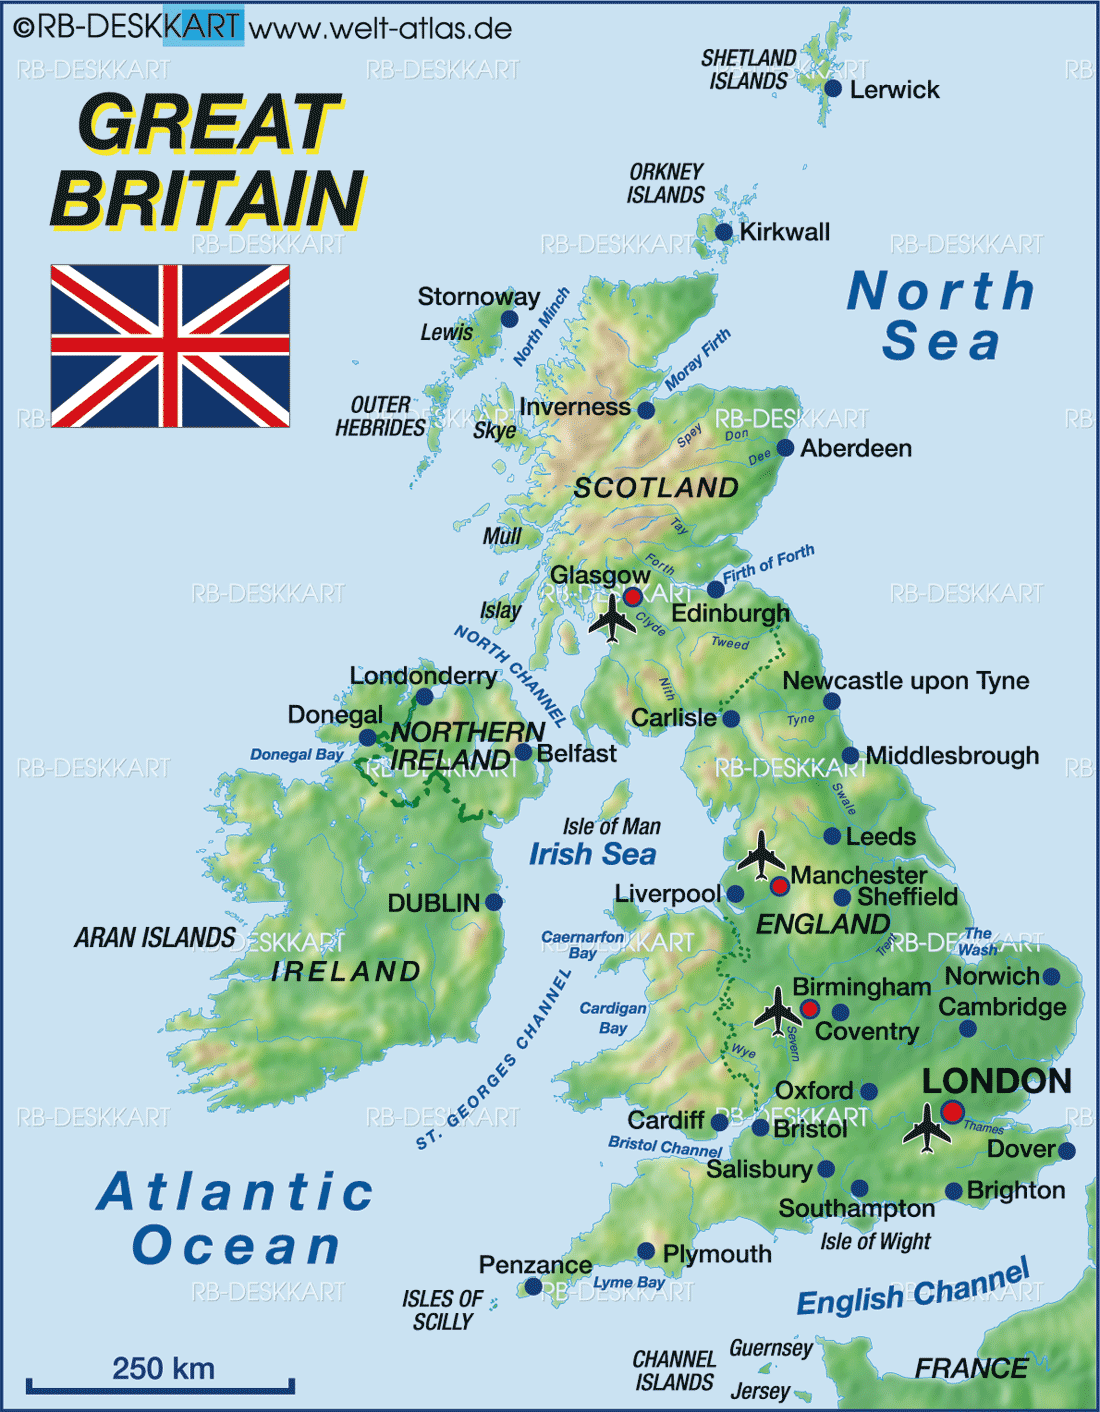 Uk north. The United Kingdom of great Britain карта. The United Kingdom of great Britain and Northern Ireland карта. Карта the uk of great Britain and Northern Ireland. Great Britain Map geographical.